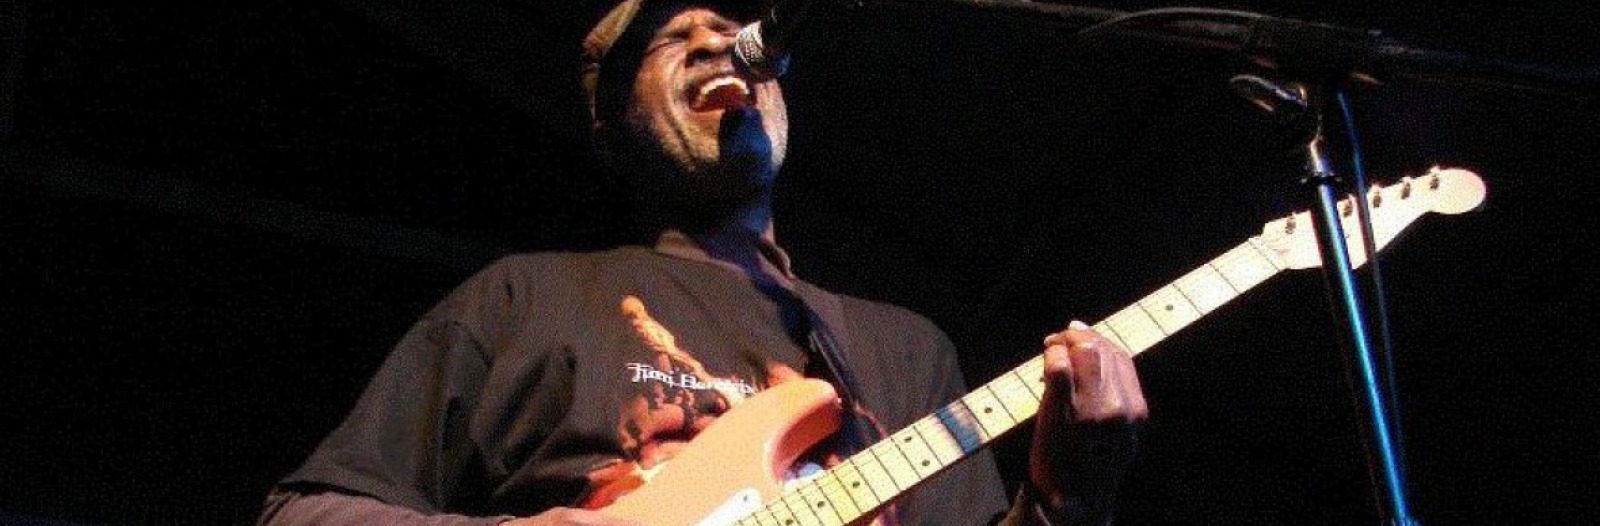 Dartanyan Brown plays bass guitar and sings into a microphone